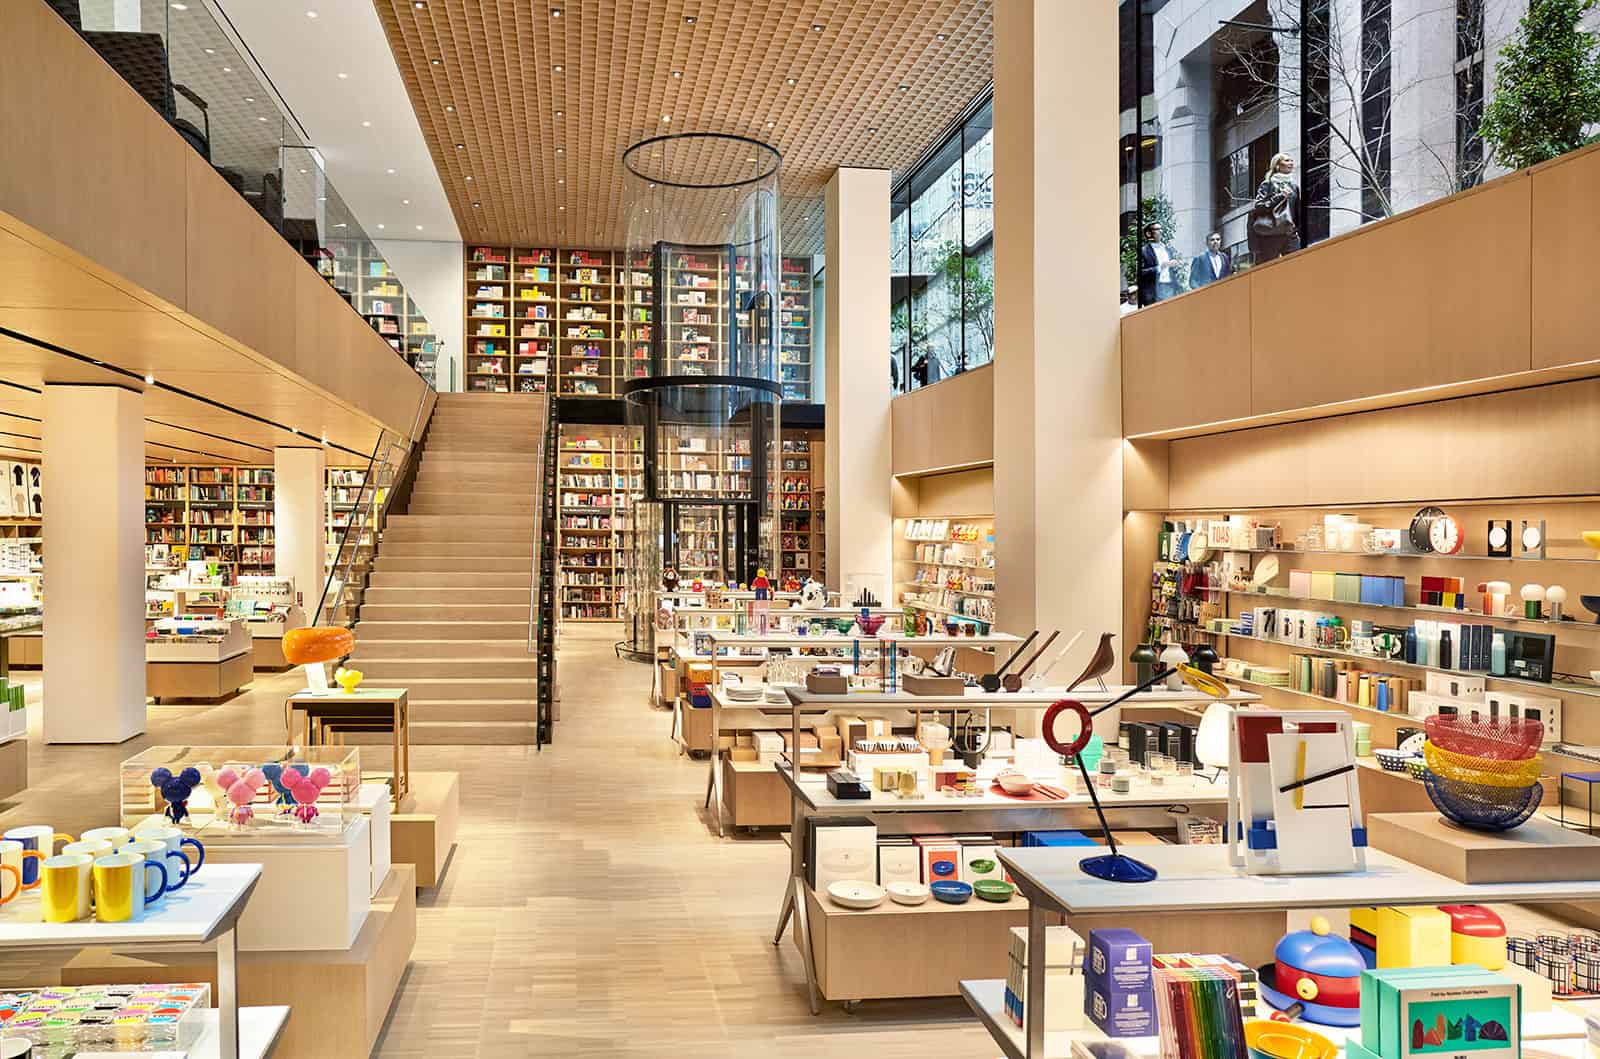 generic bookstore with bookcases filled with books and tables displaying various knick knacks and office supplies